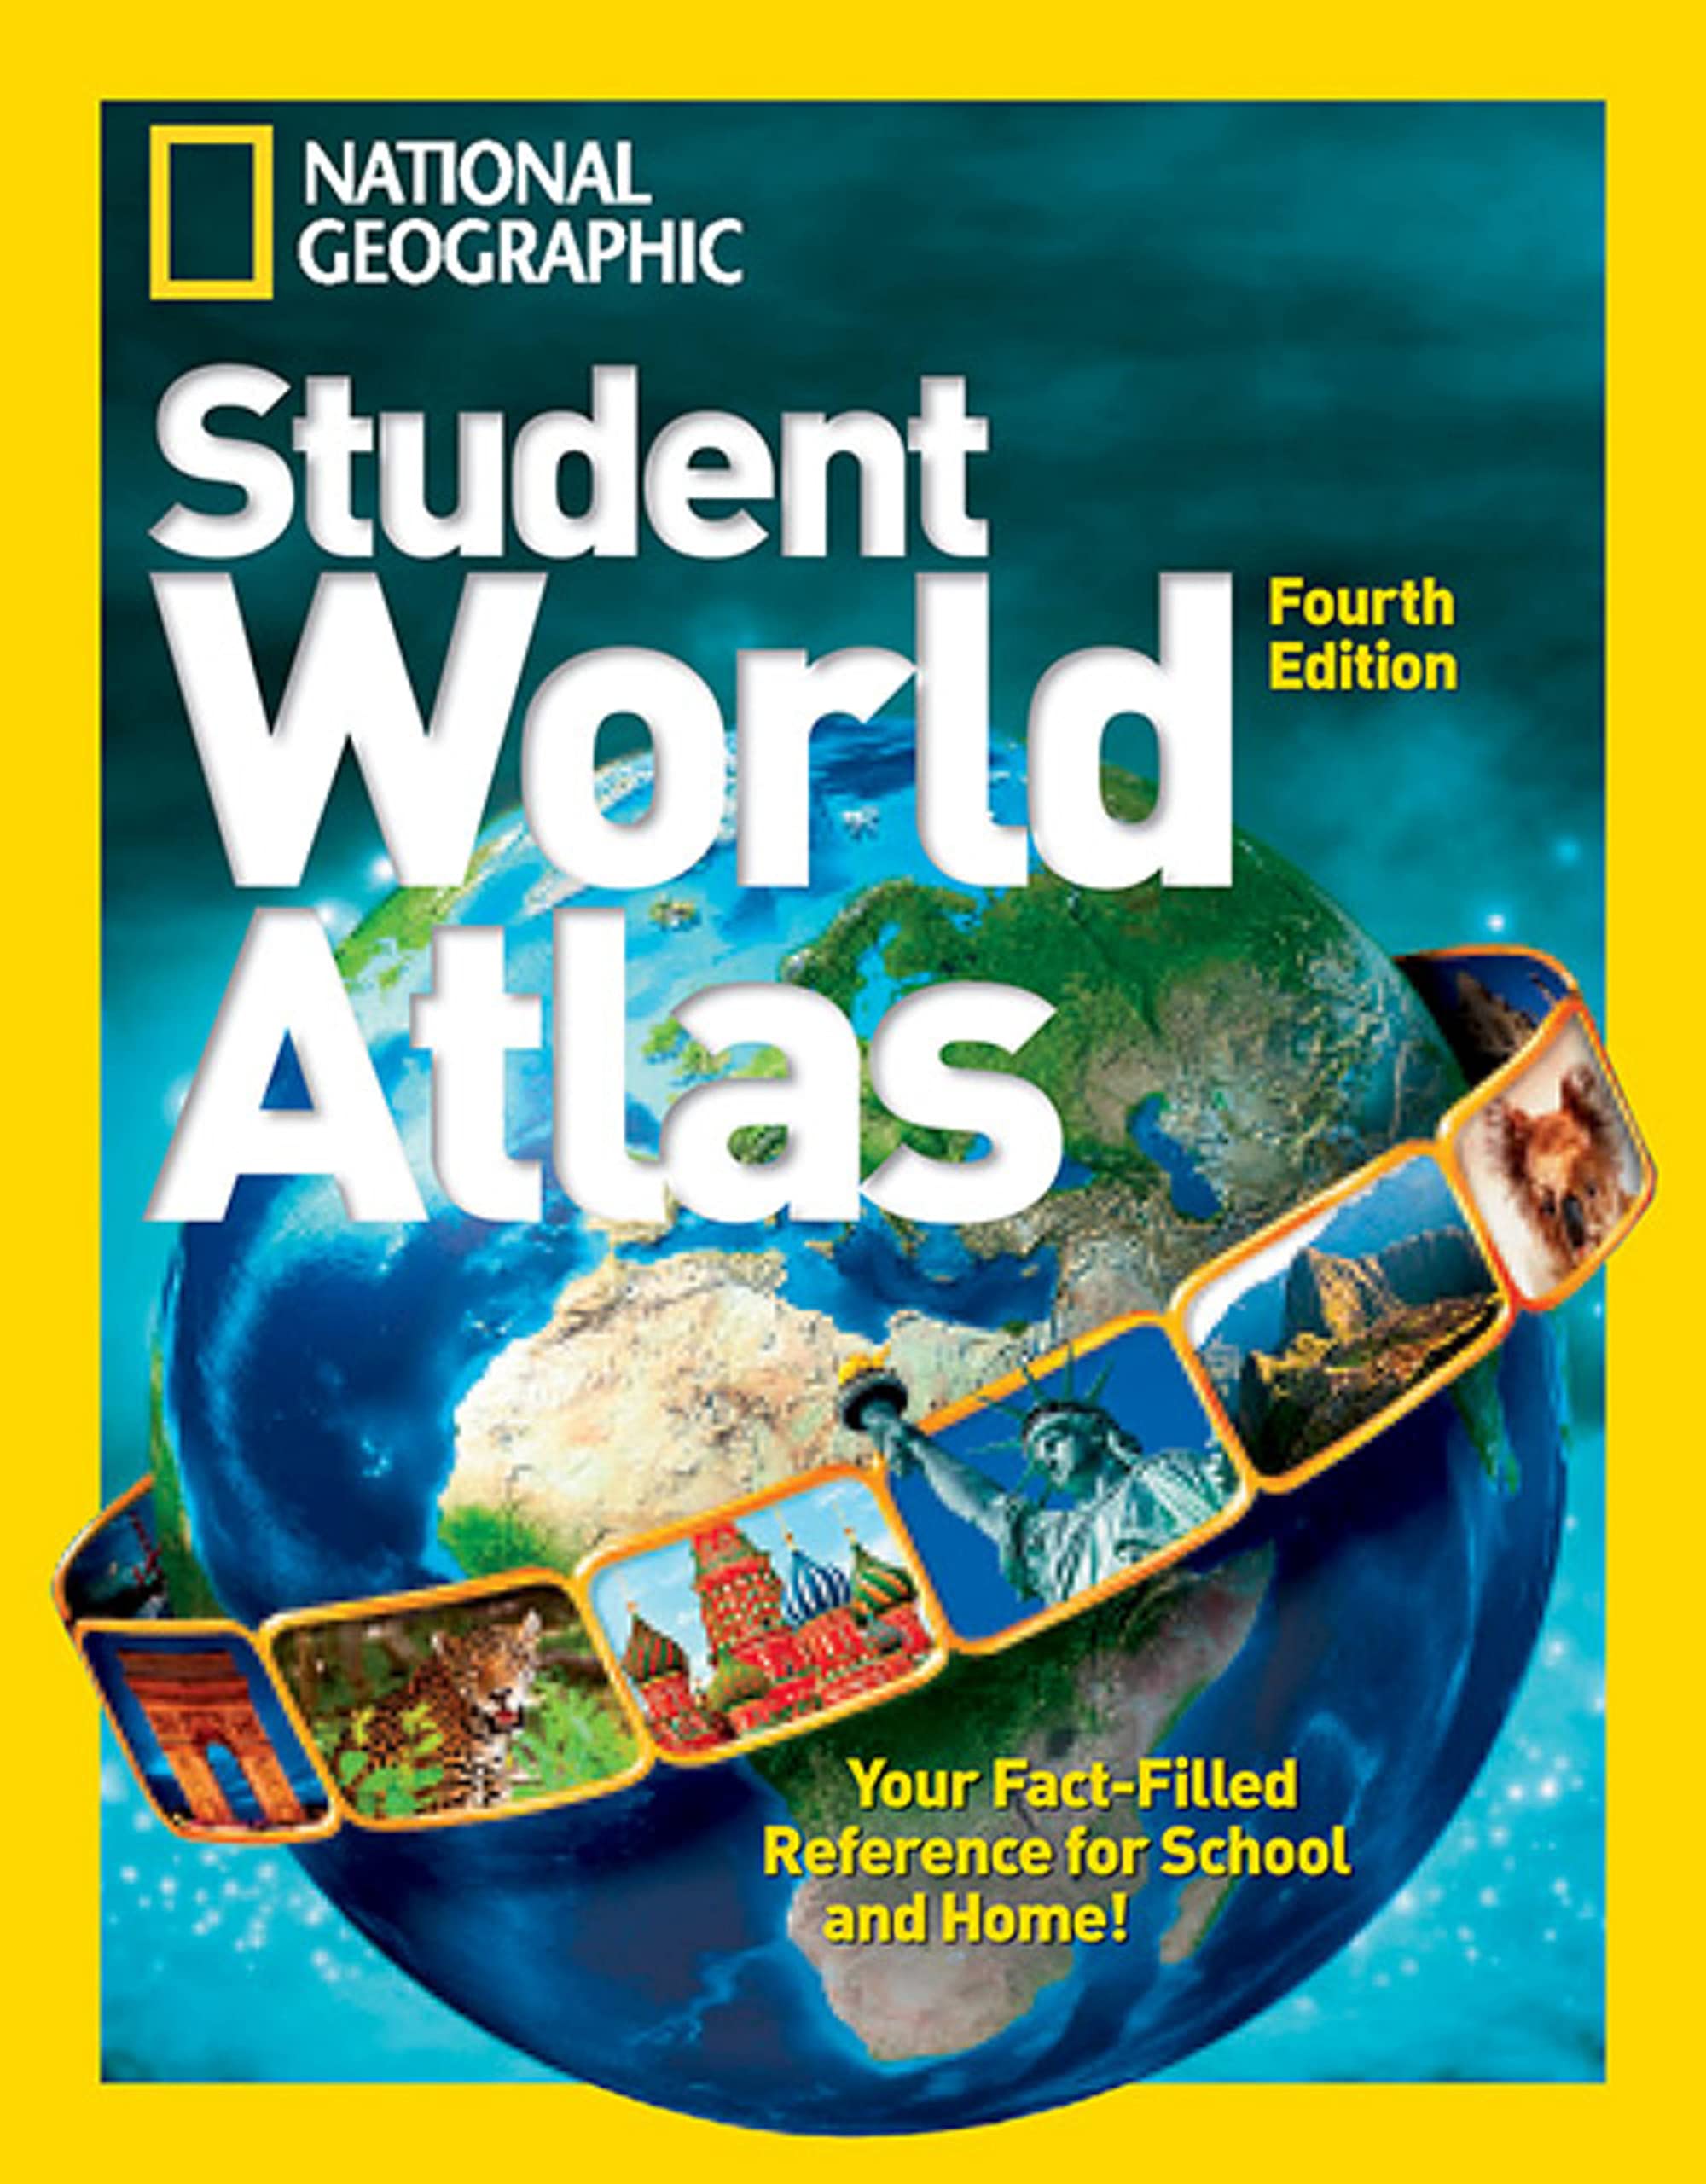 National Geographic Student World Atlas Fourth Edition: Your Fact-Filled Reference for School and Home!